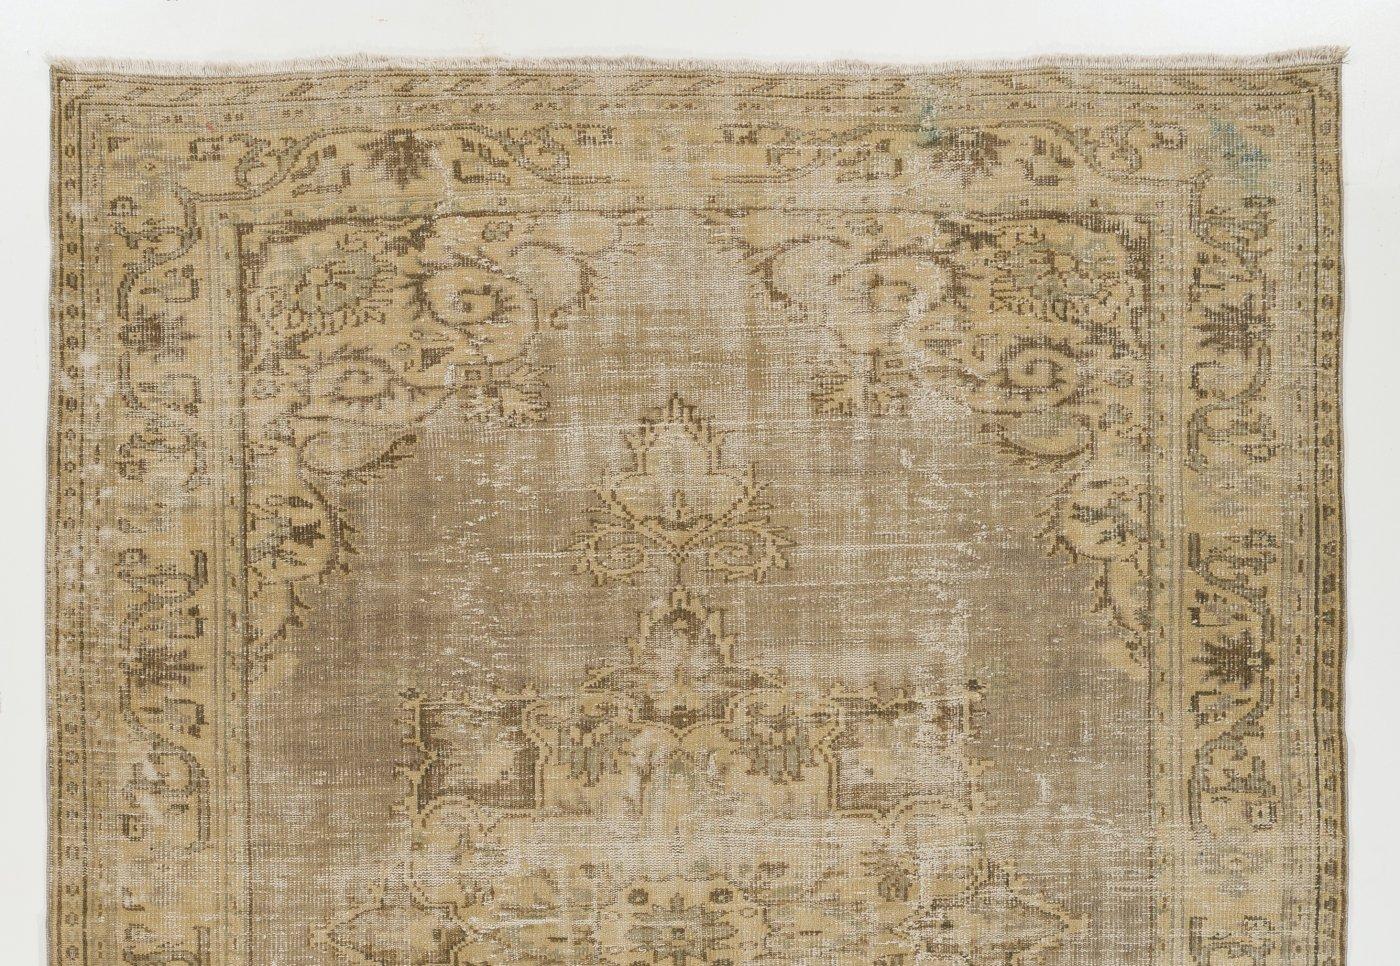 Vintage Turkish Oushak area rug, hand-knotted in Turkey in the 1960s with low wool pile on cotton foundation. It features a large medallion at its center and arabesque corner pieces in soft, muted hues of taupe gray, sand and moss green. The rug is